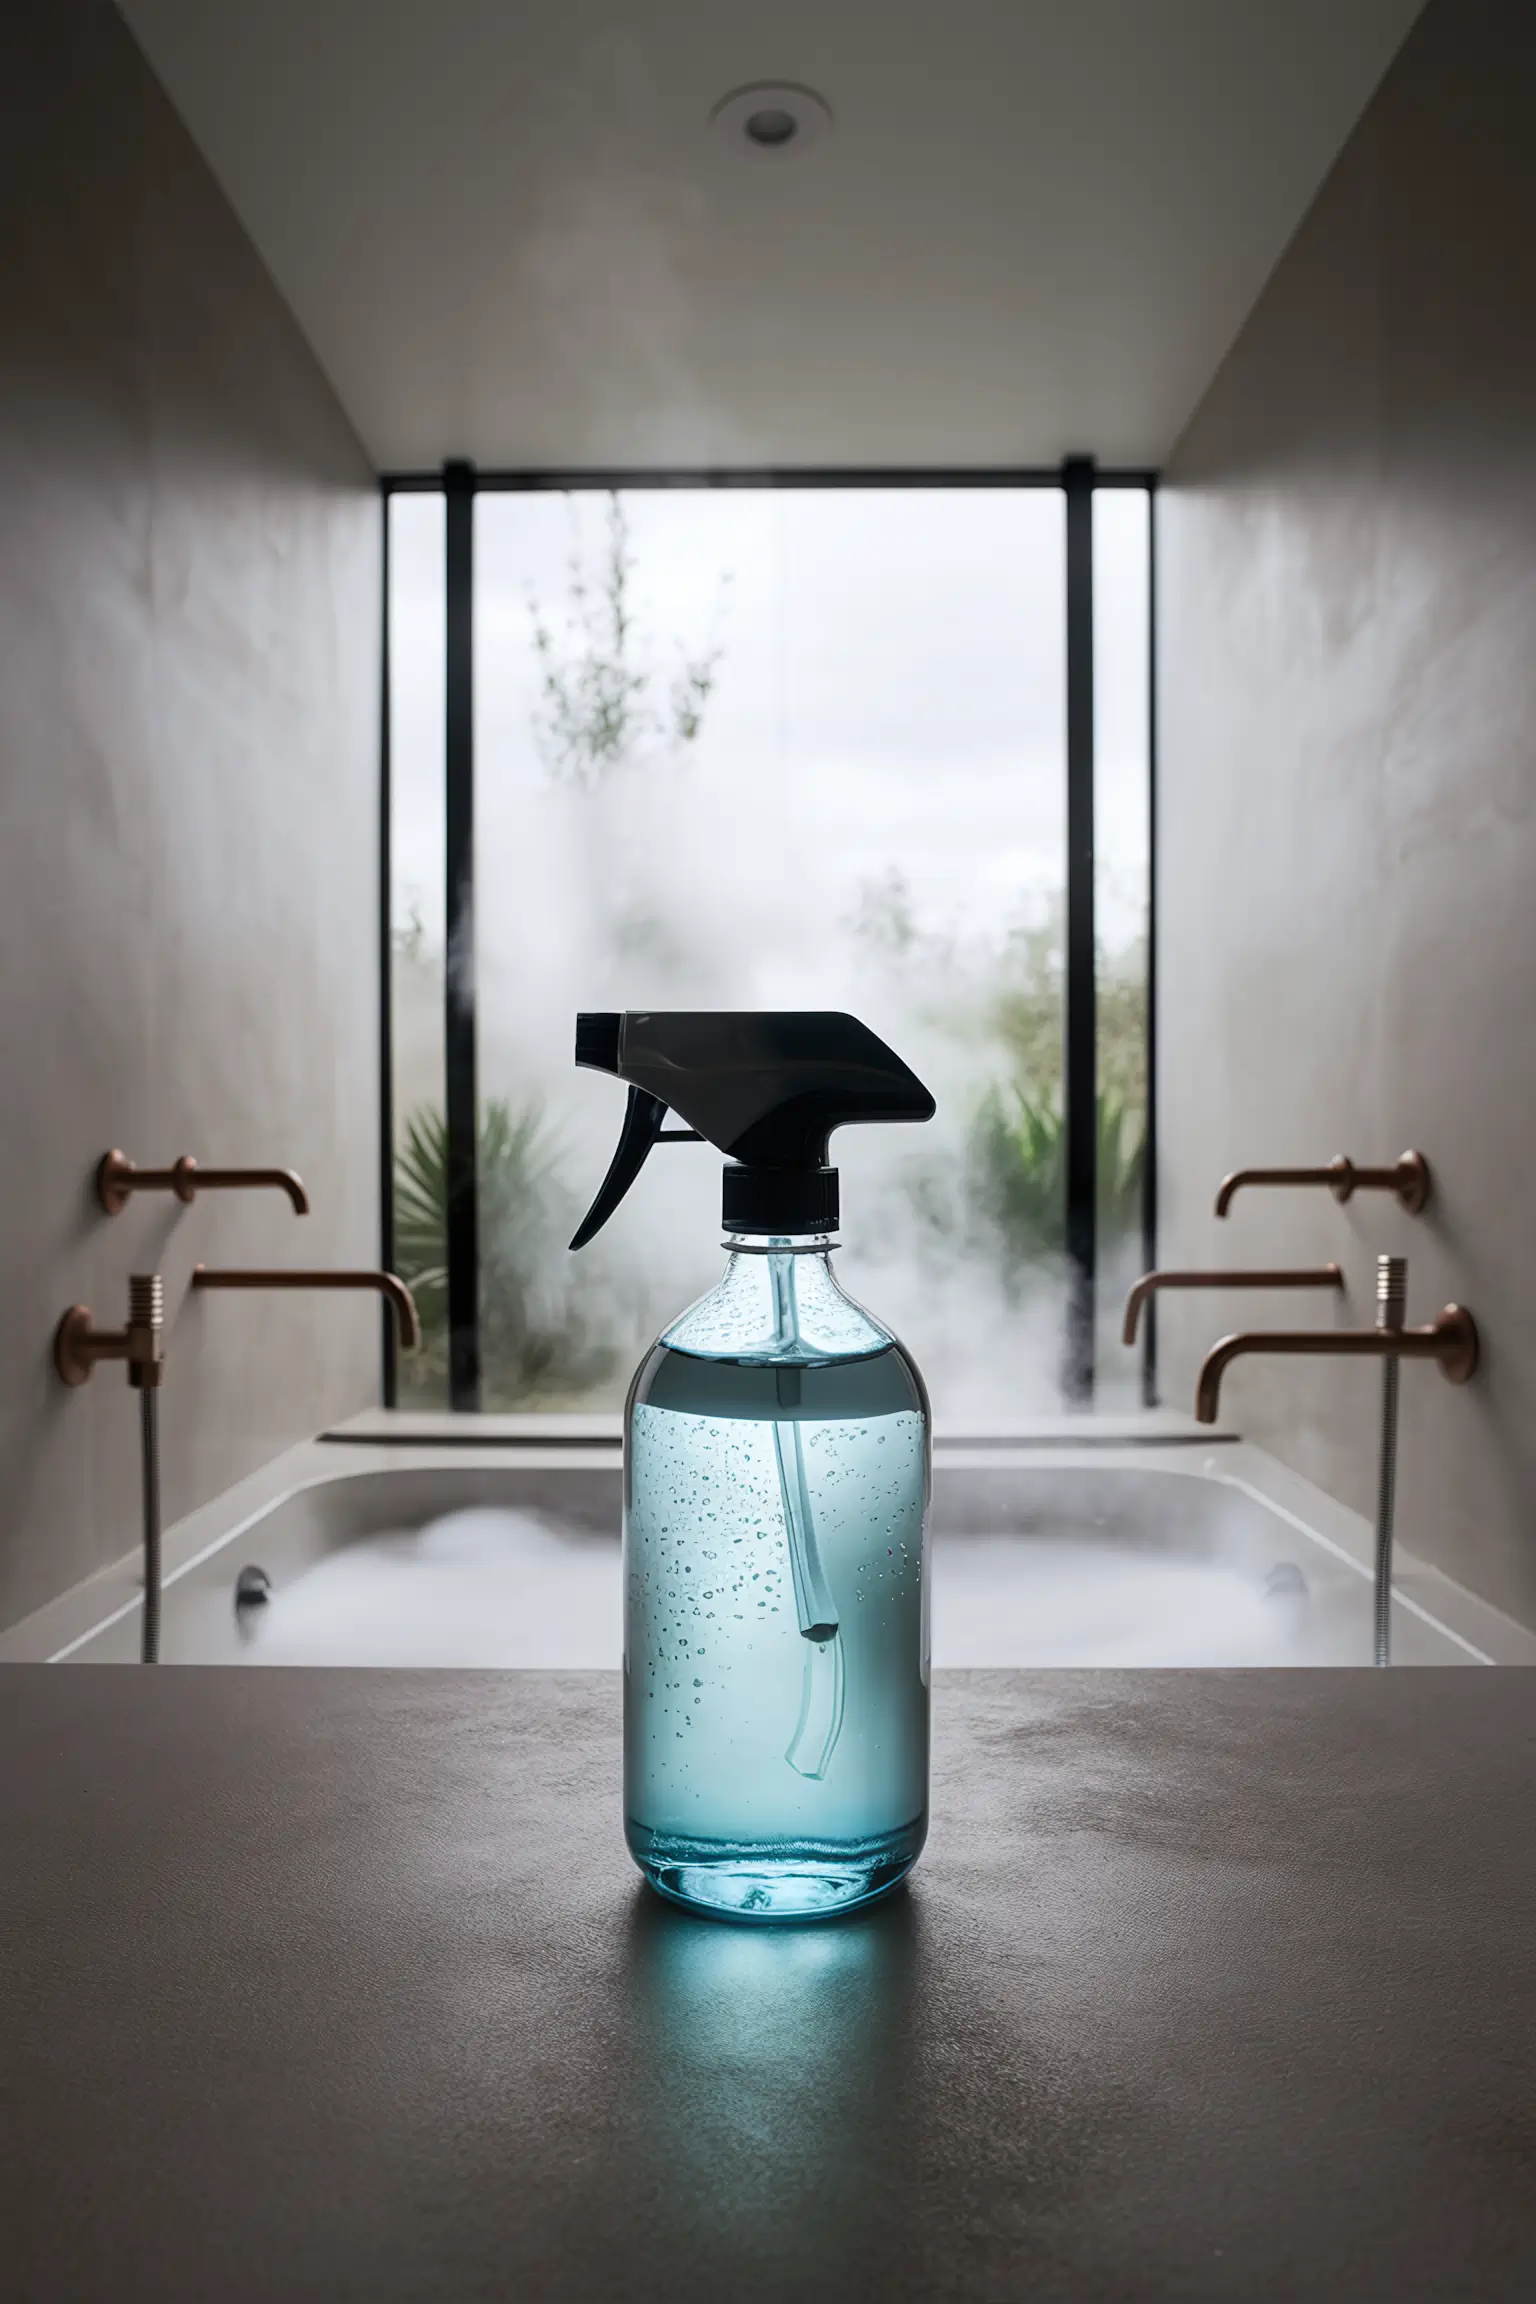 Minimalistic bathroom with a spray bottle of shower cleaner.